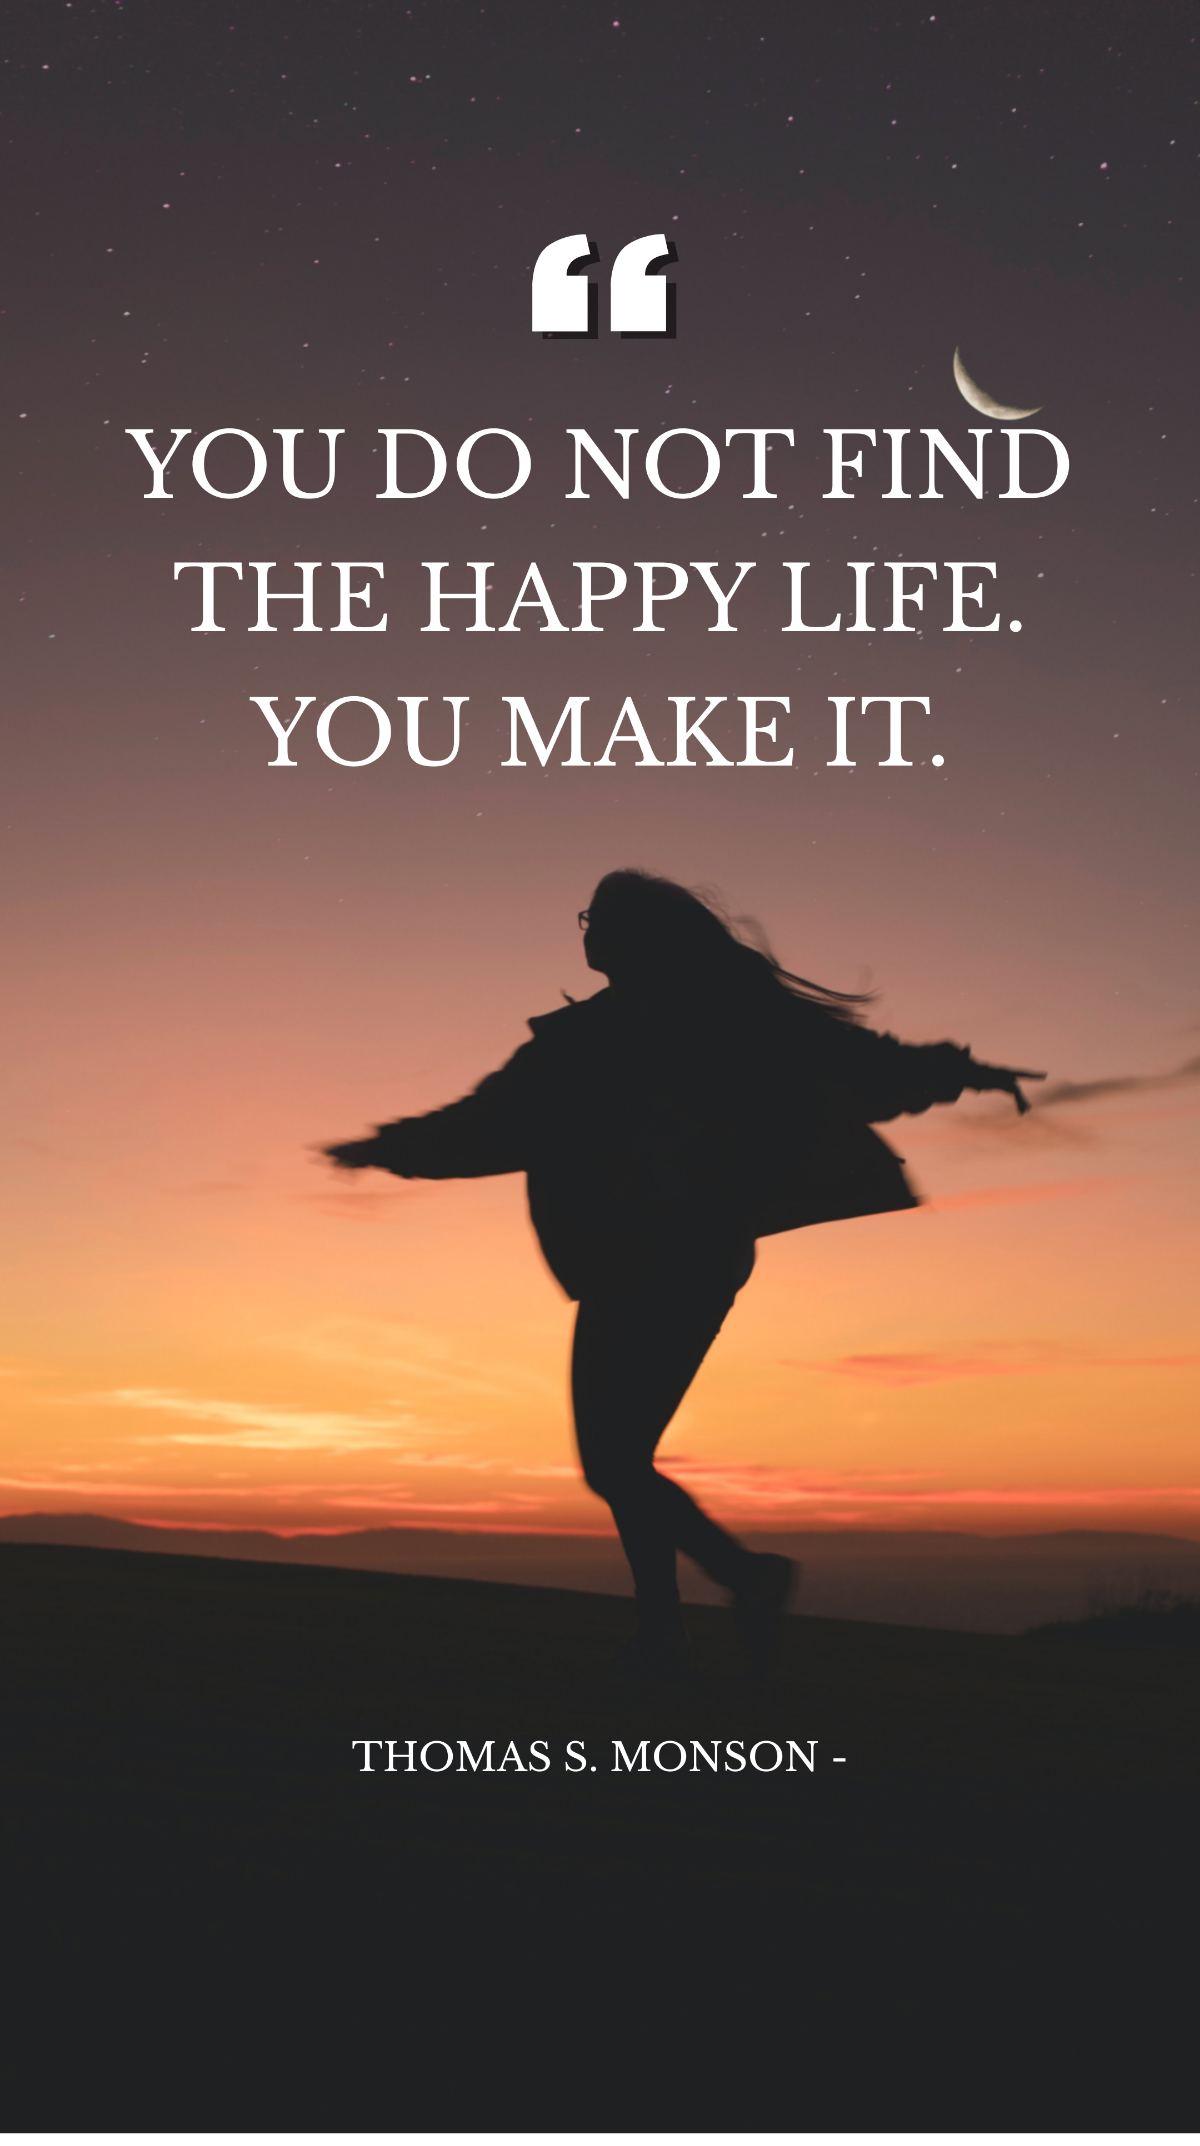 Thomas S. Monson - You do not find the happy life. You make it. Template